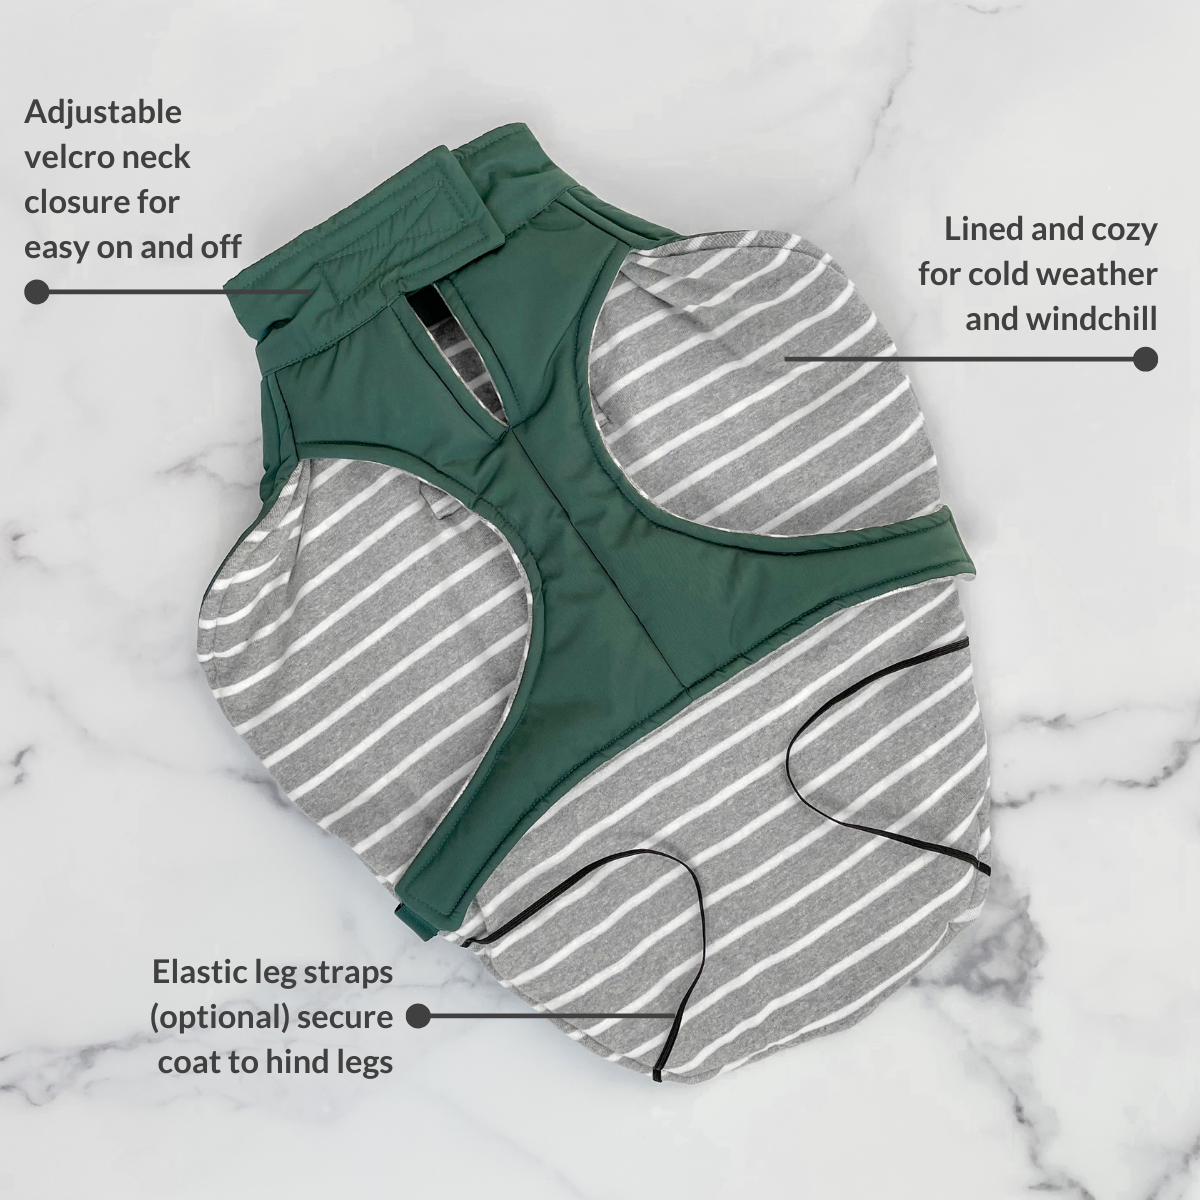 DJANGO's Whistler Winter Dog Coat is the best cold weather and winter dog parka. This best winter dog jacket features an adjustable neck velcro closure and chest strap, elastic leg bands, and a super soft interior lining - djangobrand.com